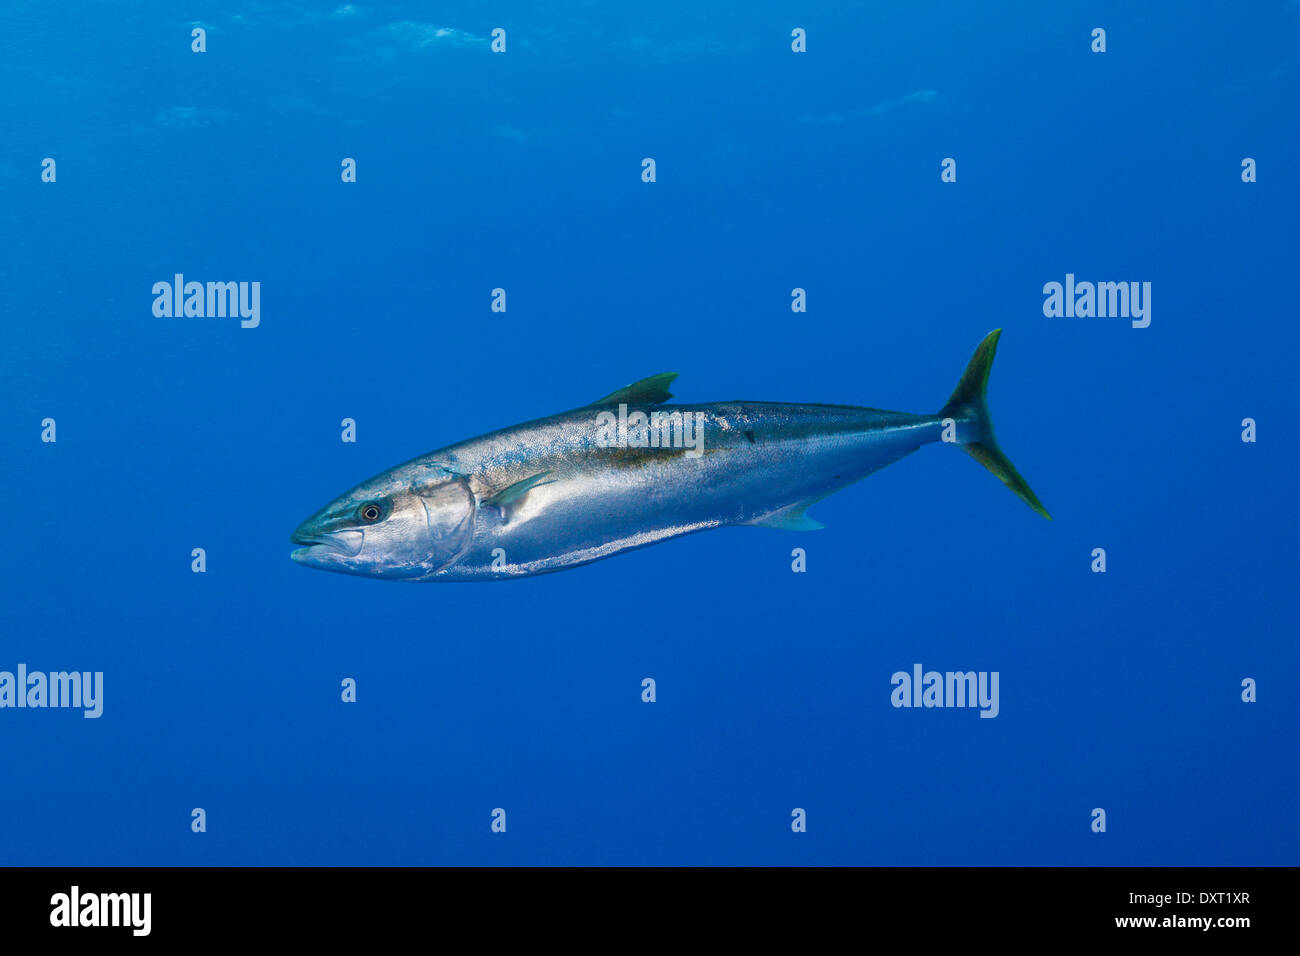 Pacific yellowtail caught on fishing hook in ocean Stock Photo - Alamy